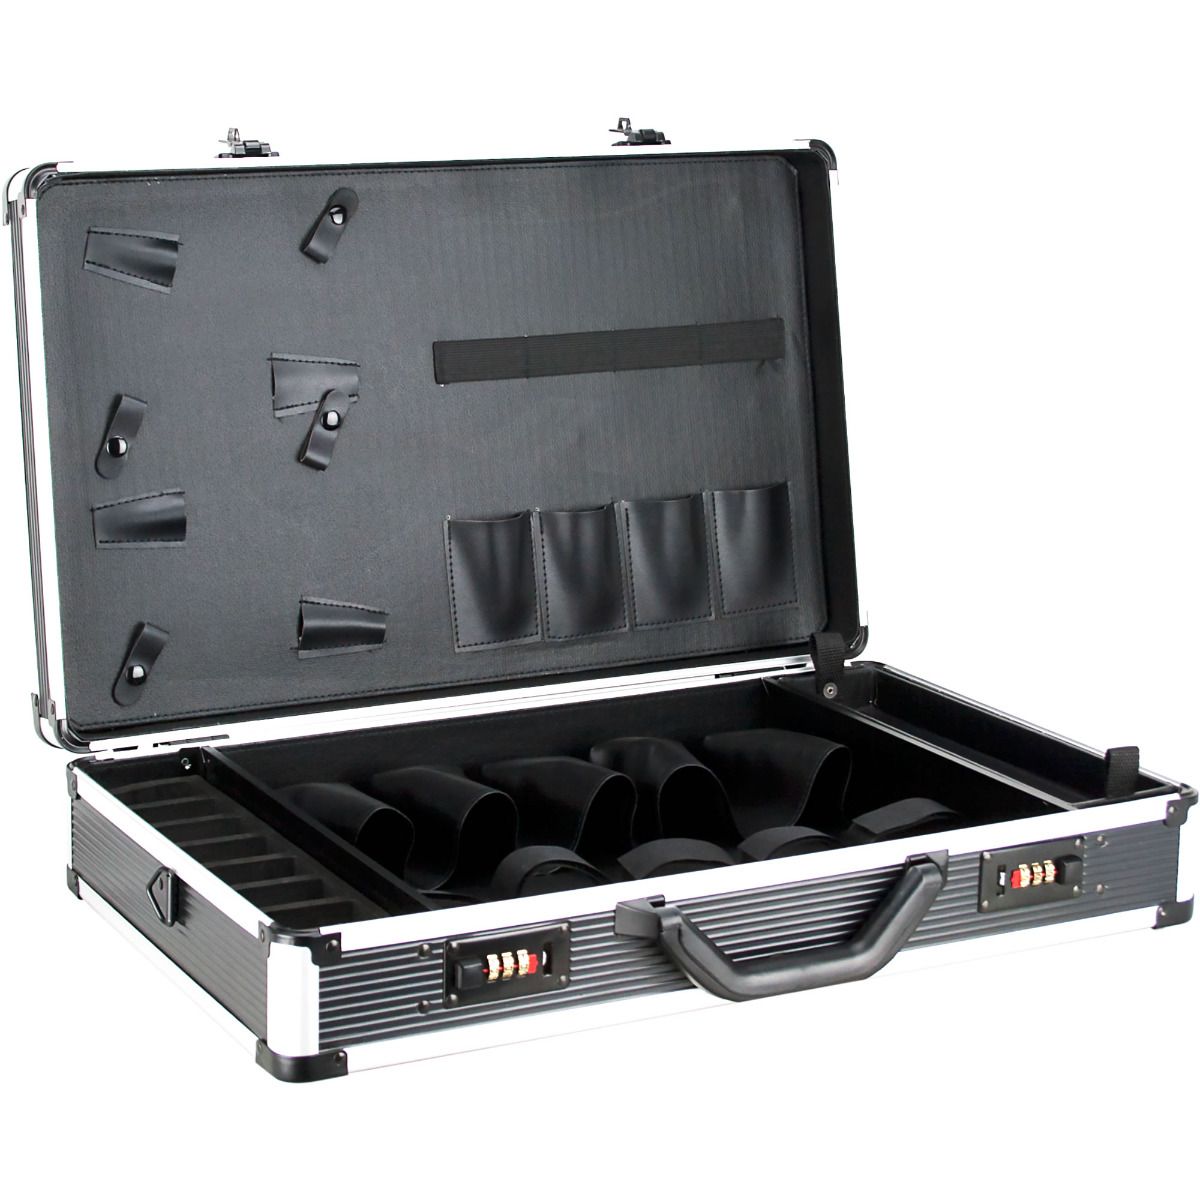 VBK001 - Professional Barber Portable Travel Case w/Shears Holder and Clipper Pockets for Hair Stylist